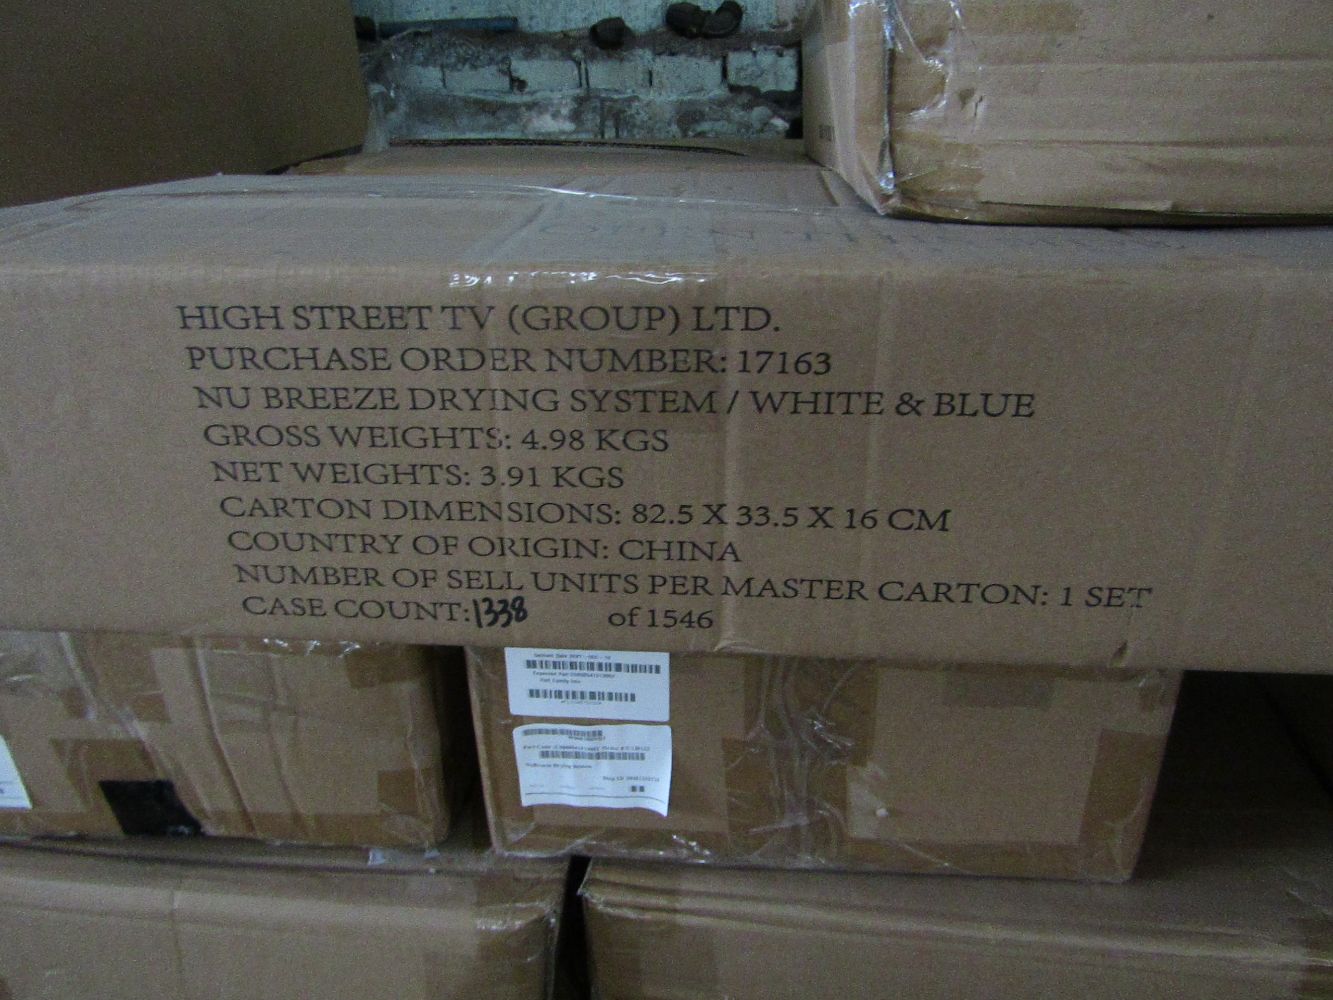 Pallets of End of line and Customer returns retail stock